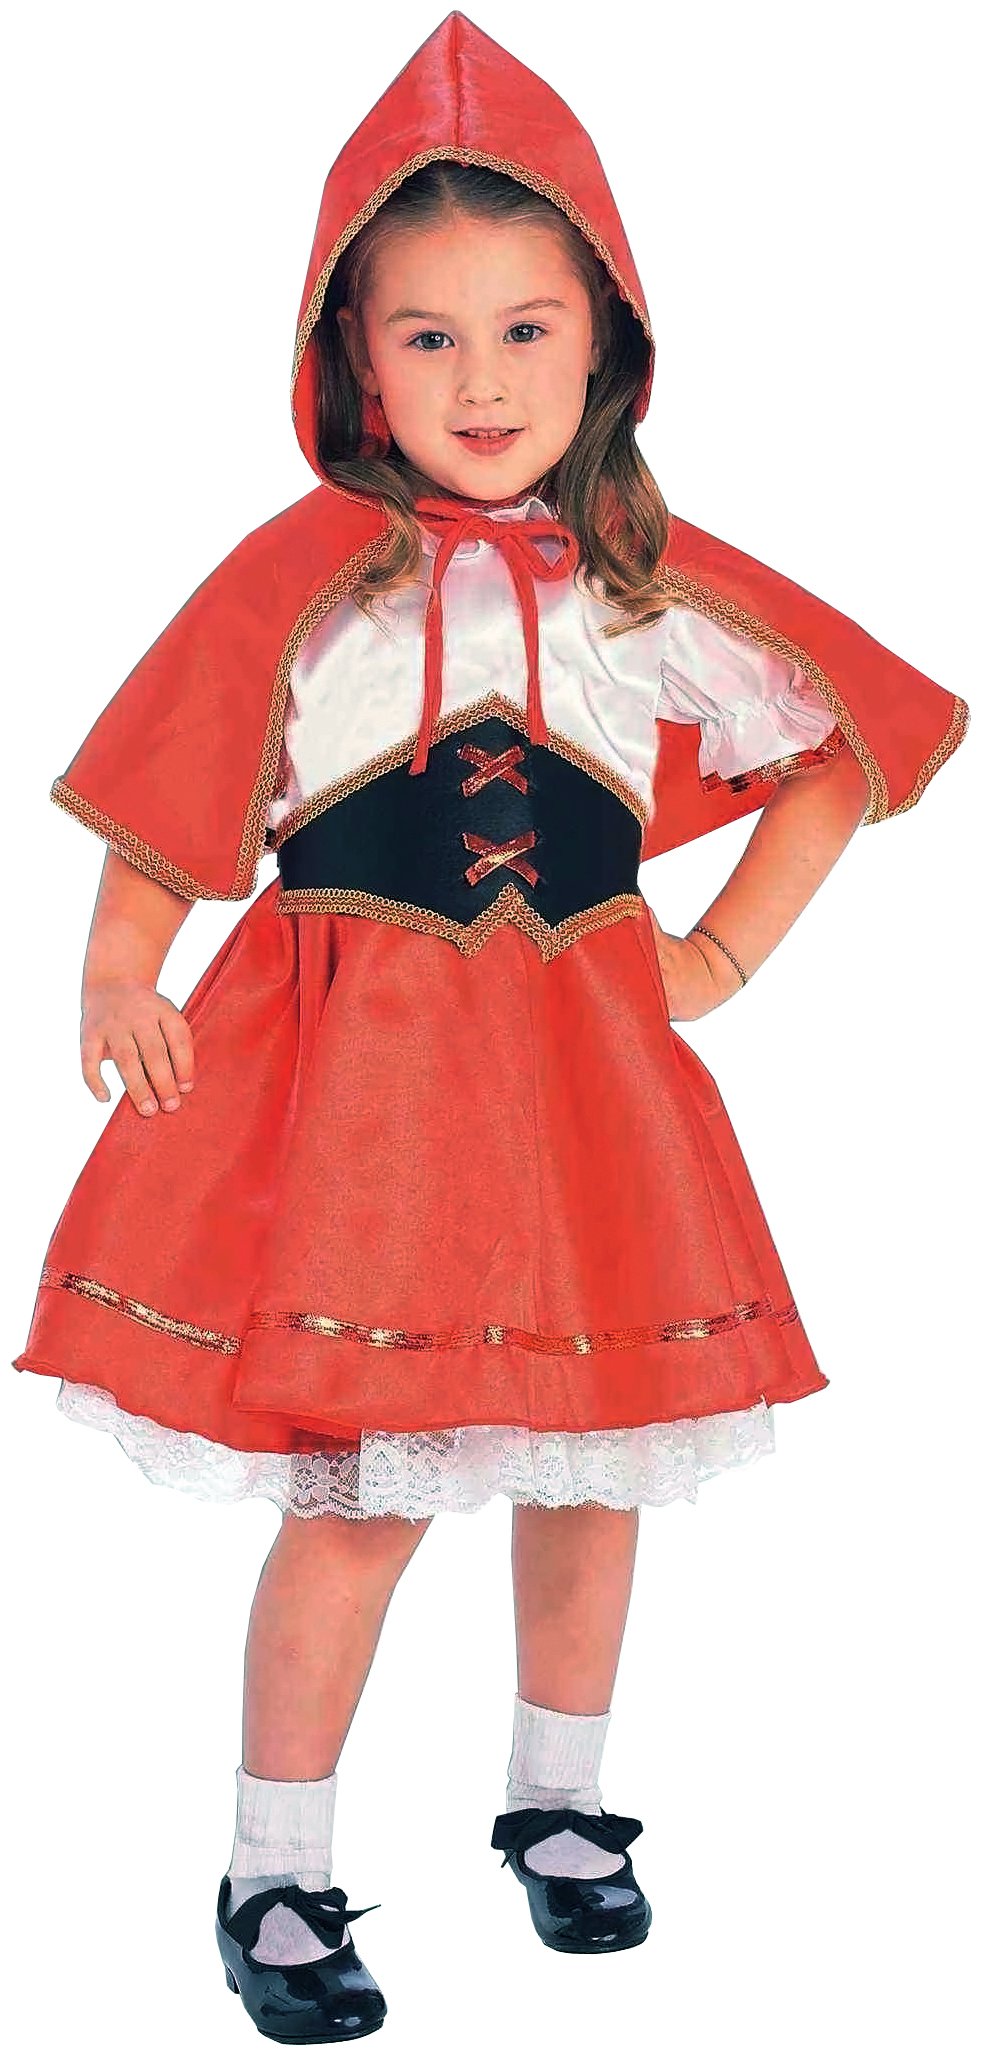 Forum Novelties Kids Deluxe Lil' Red Riding Hood Costume, Toddler, One Color , 41 Inch (Pack of 1)